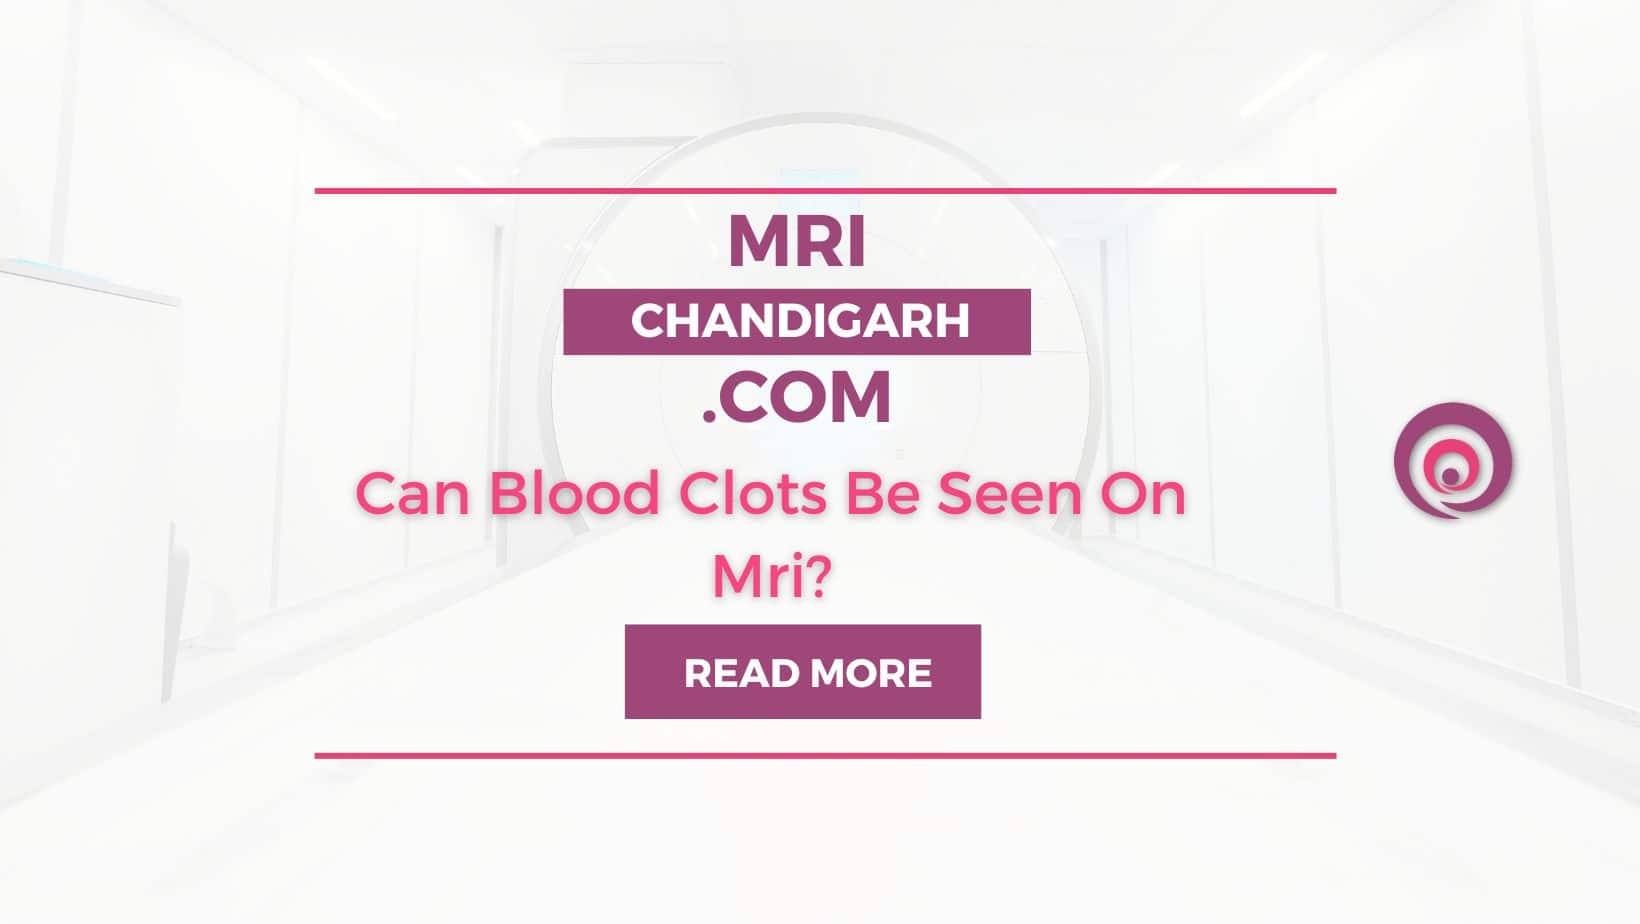 Can Blood Clots Be Seen On Mri?